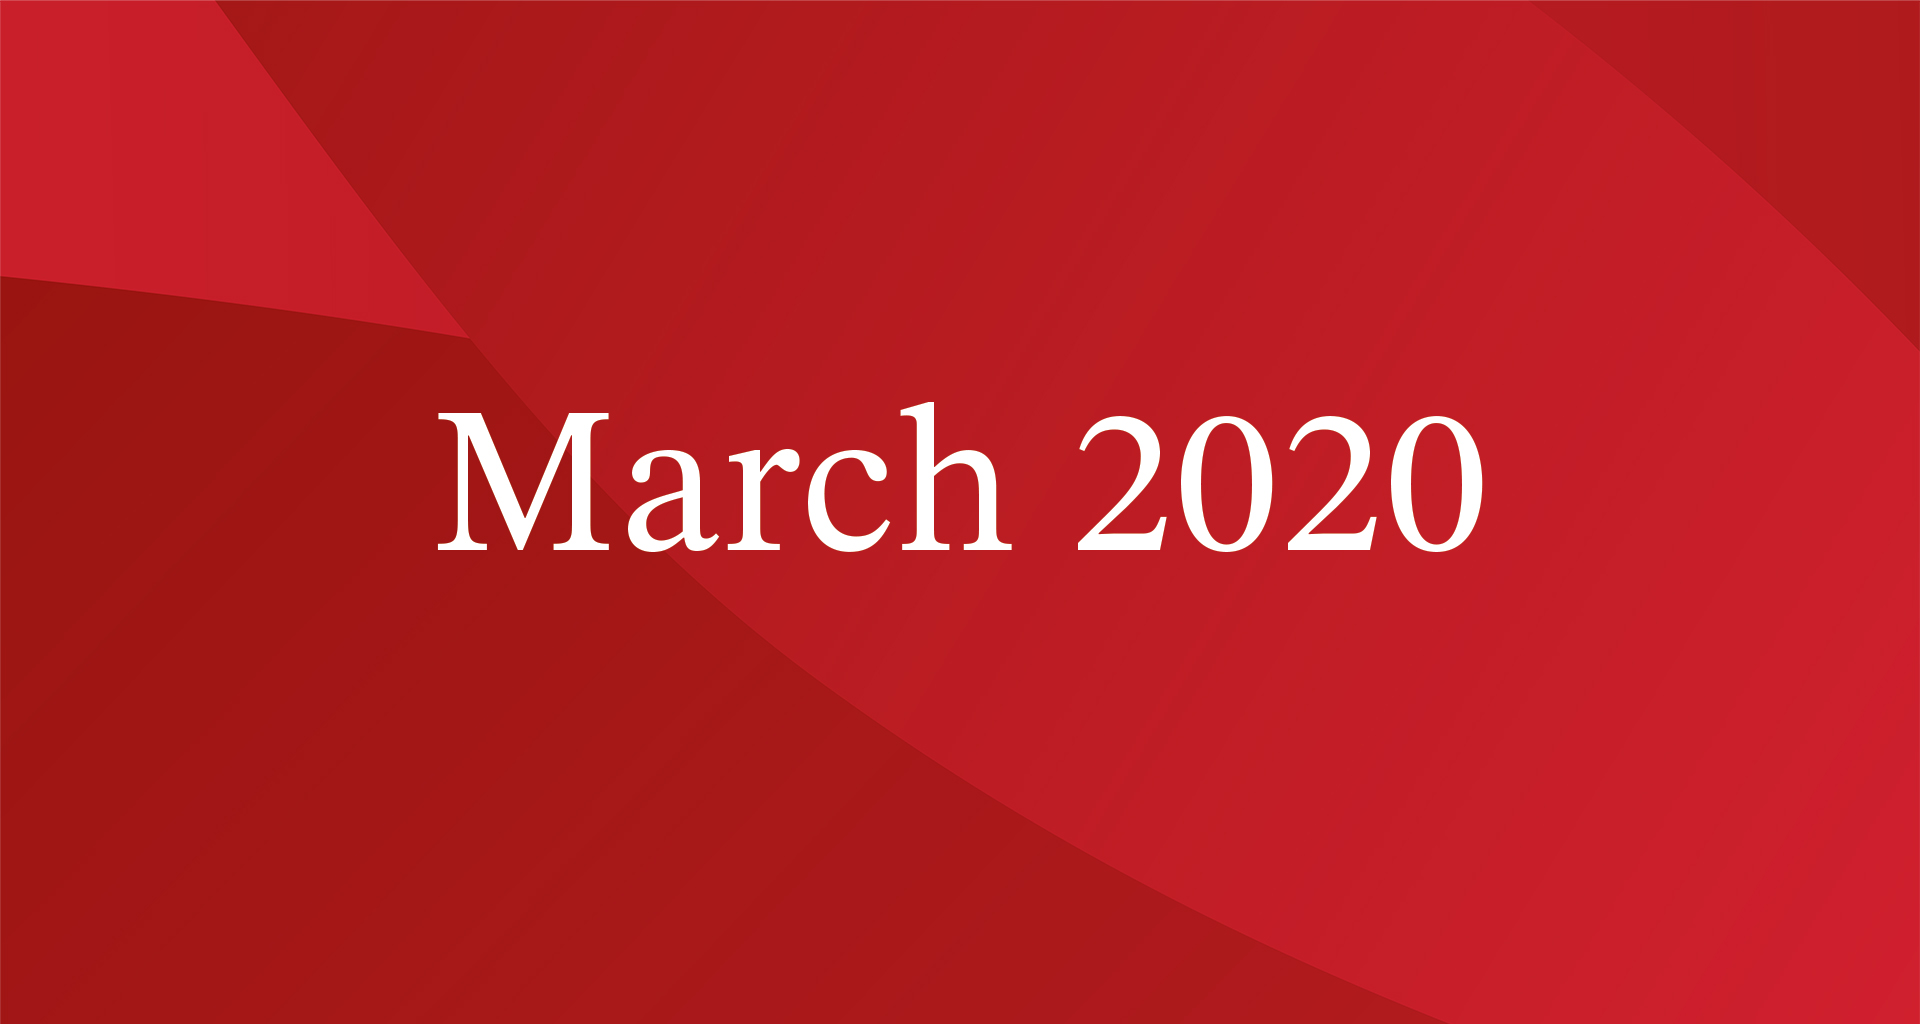 March 2020 President's Blog Image